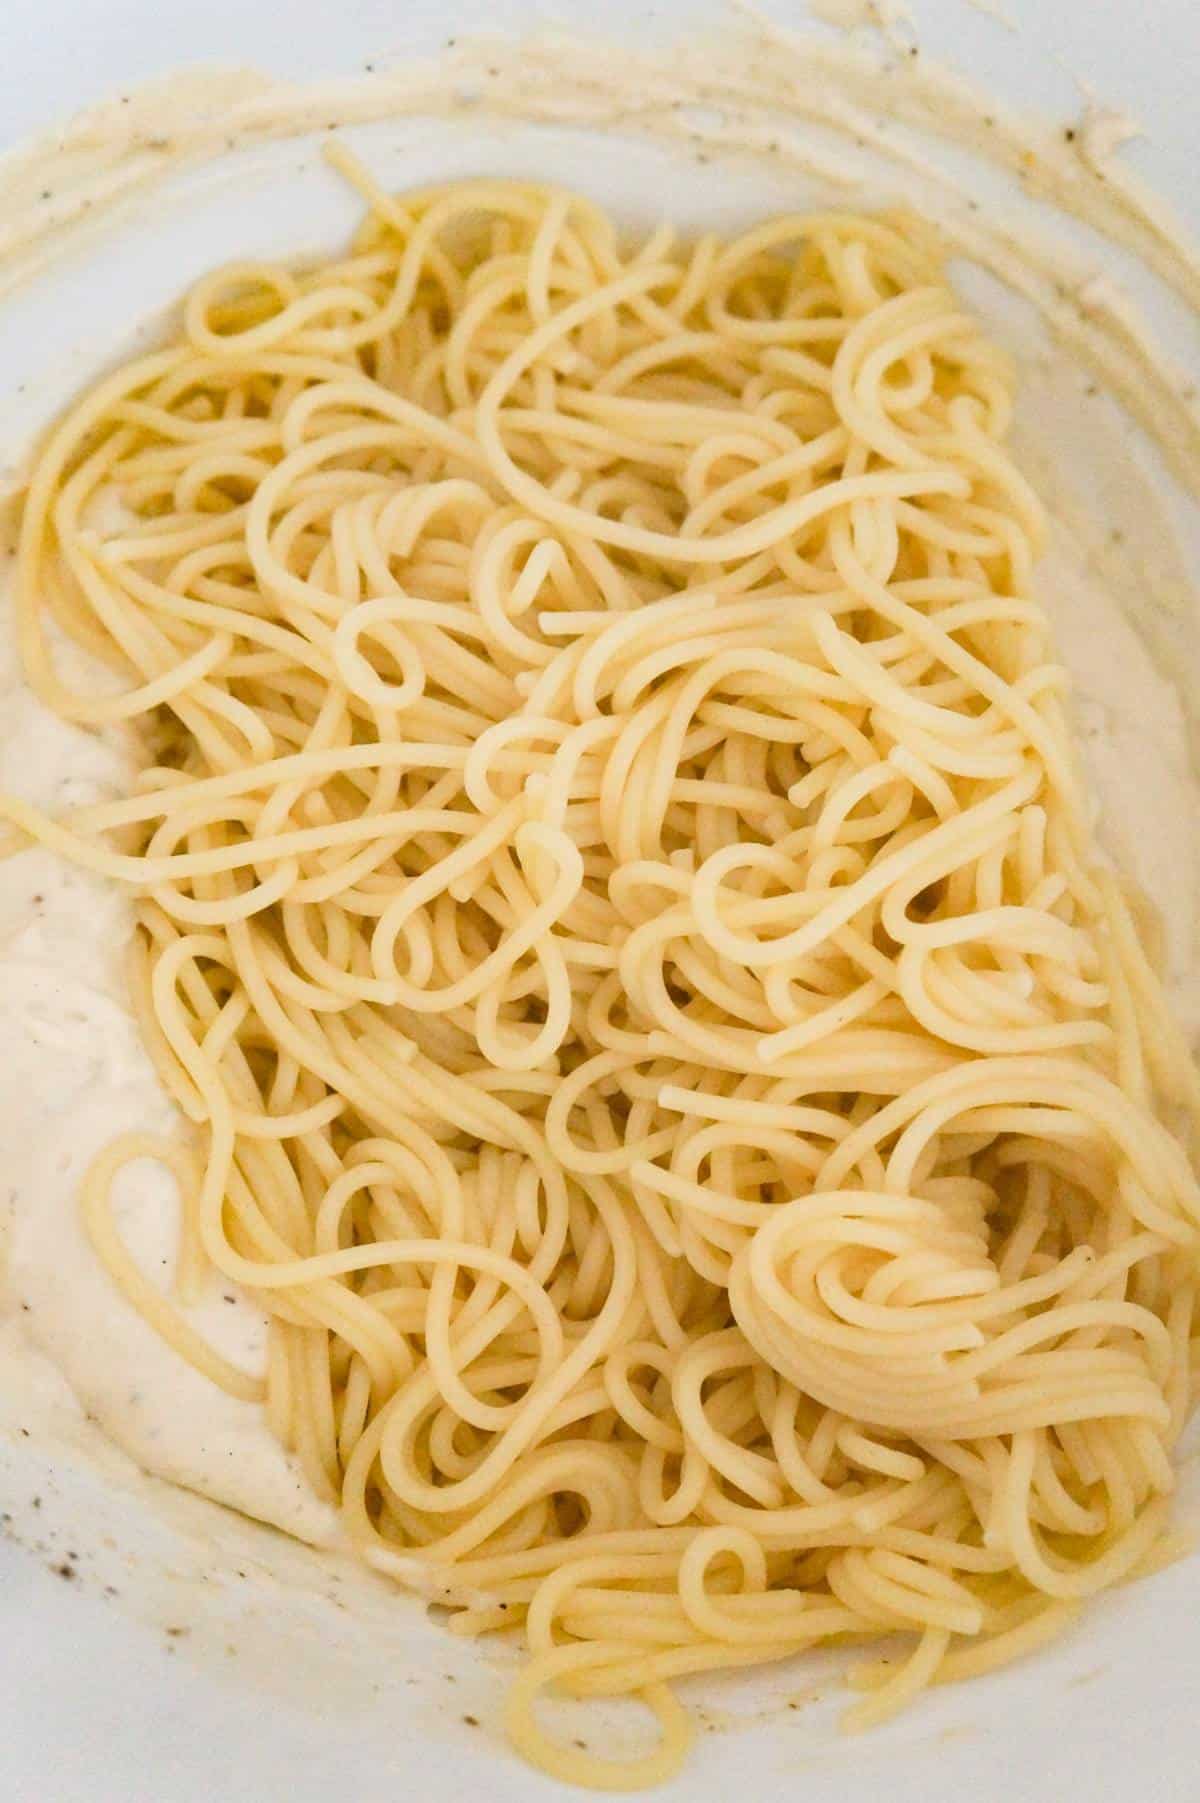 cooked spaghetti on top of creamy soup mixture in a mixing bowl